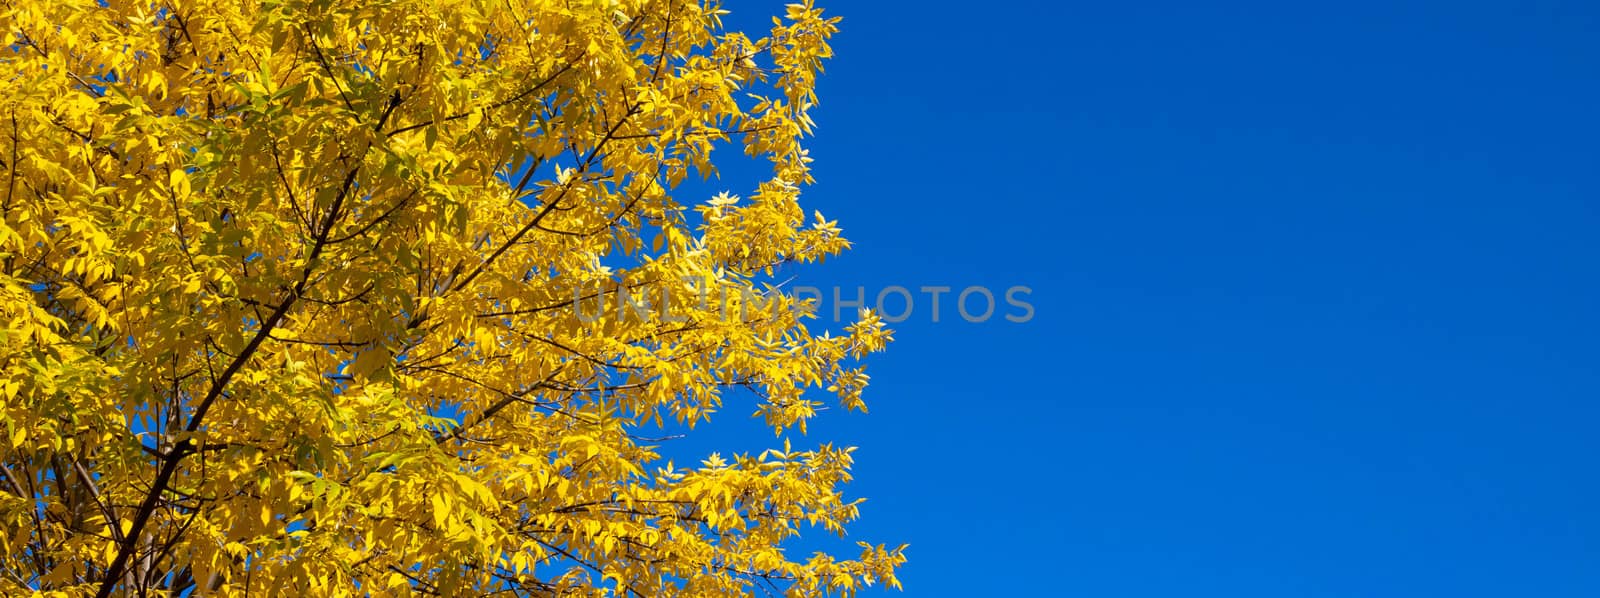 Autumn nature background. Panorama of yellow autumn leaves of ash against a blue sky by lapushka62